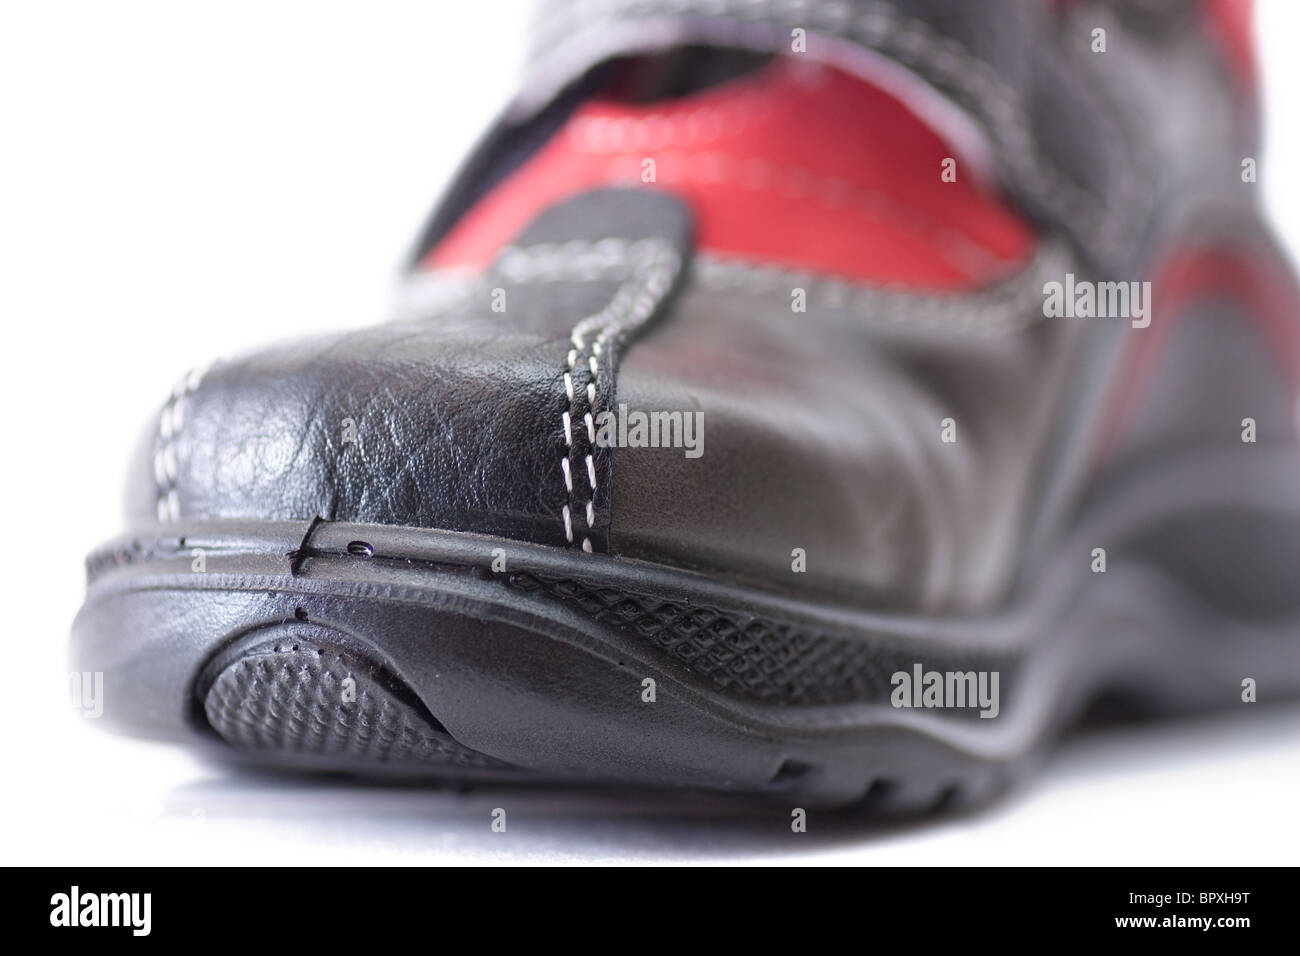 Smooth and rough shoe soles - Stock Image - C014/6945 - Science Photo  Library